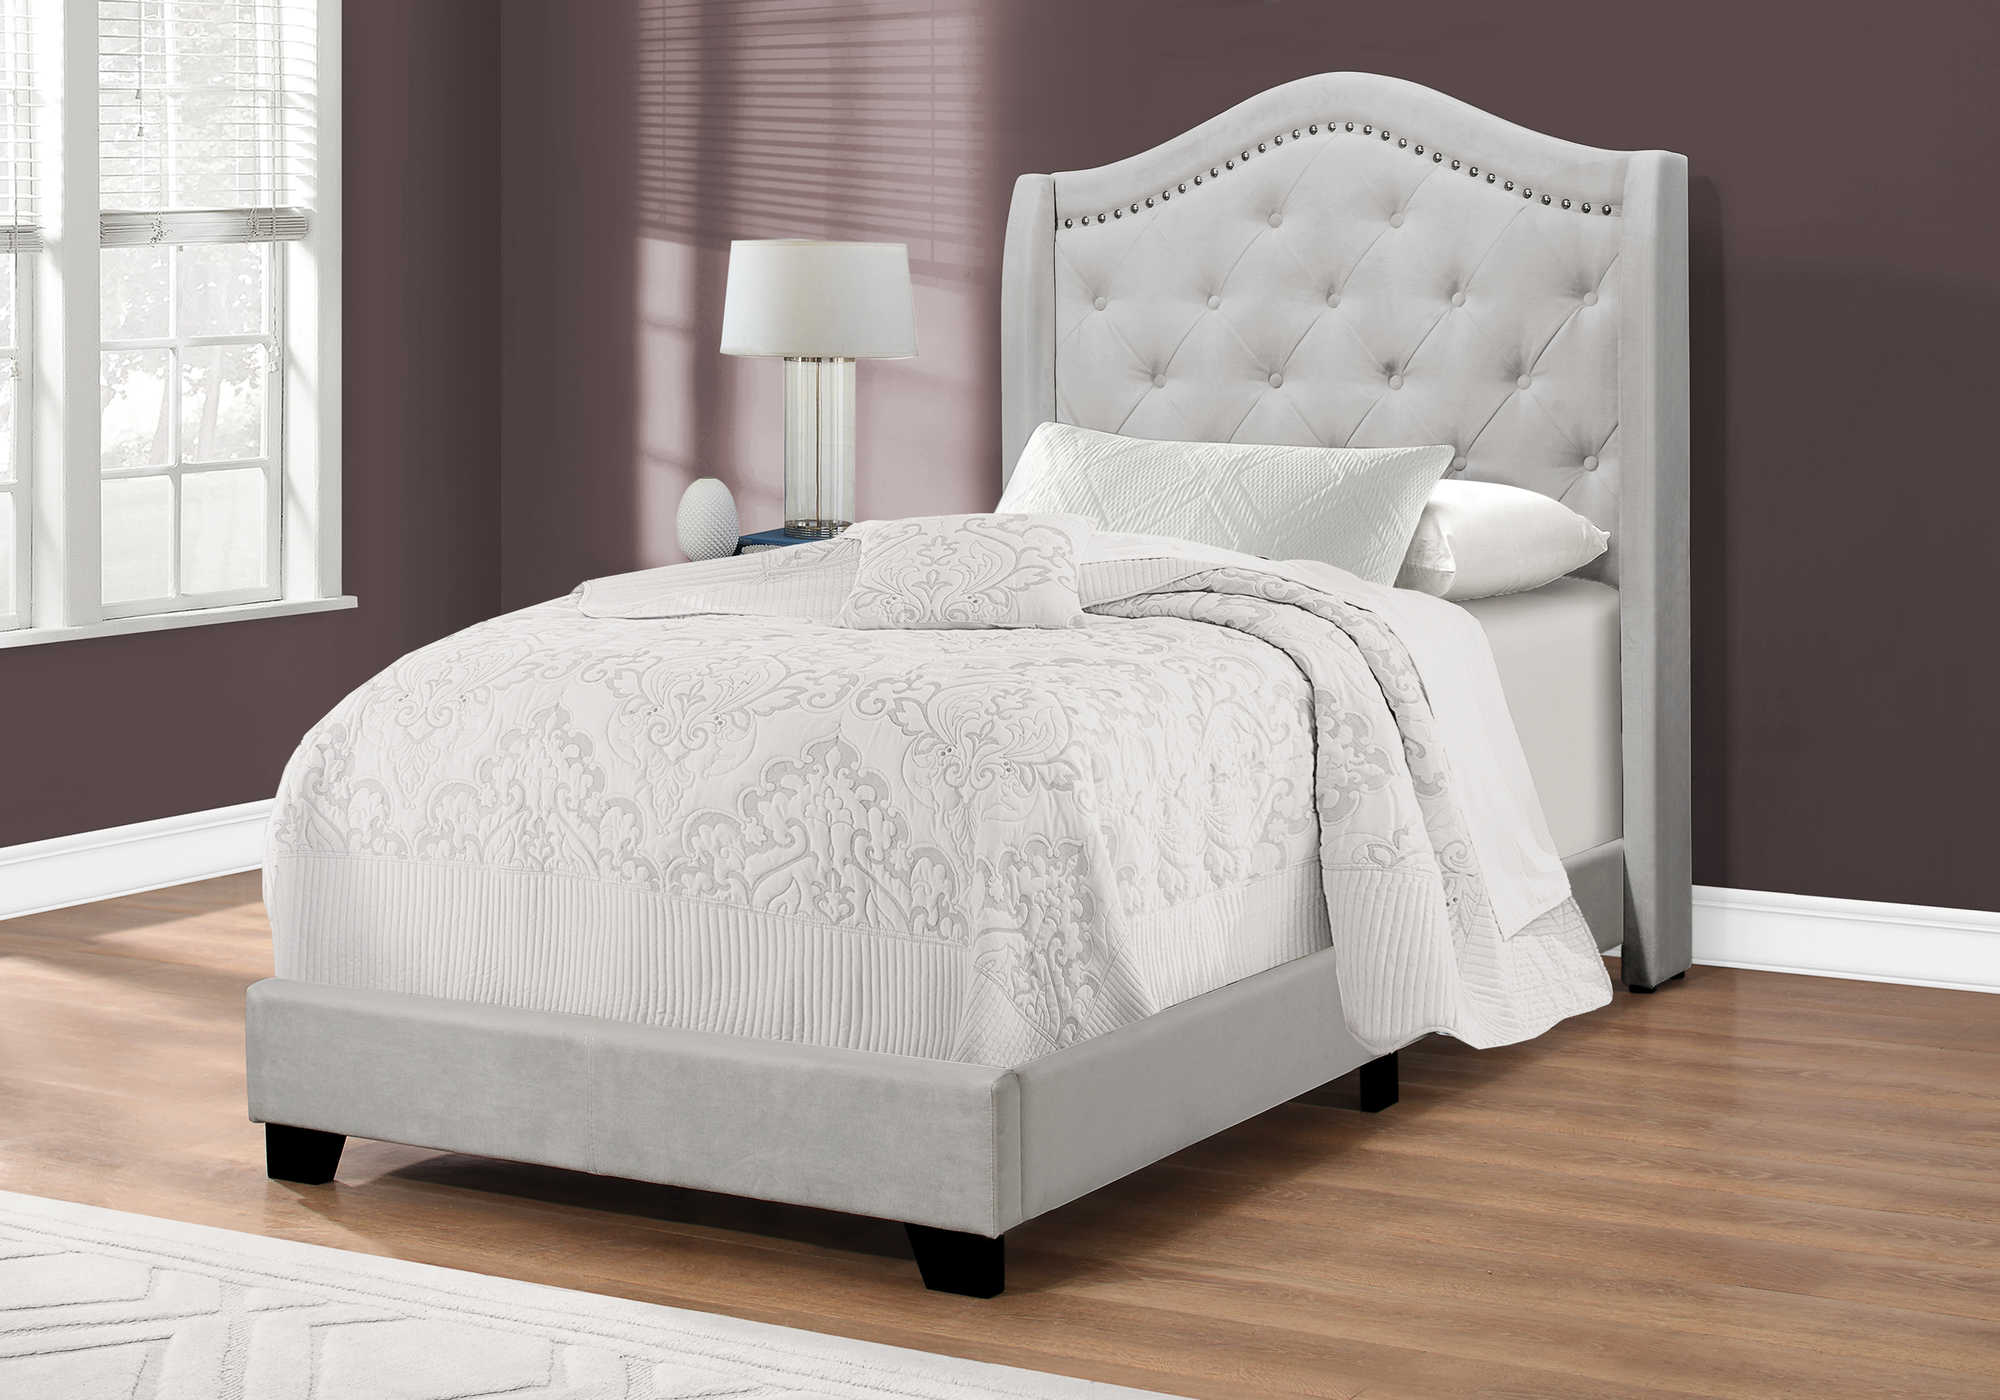 BED - TWIN SIZE / LIGHT GREY VELVET WITH CHROME TRIM